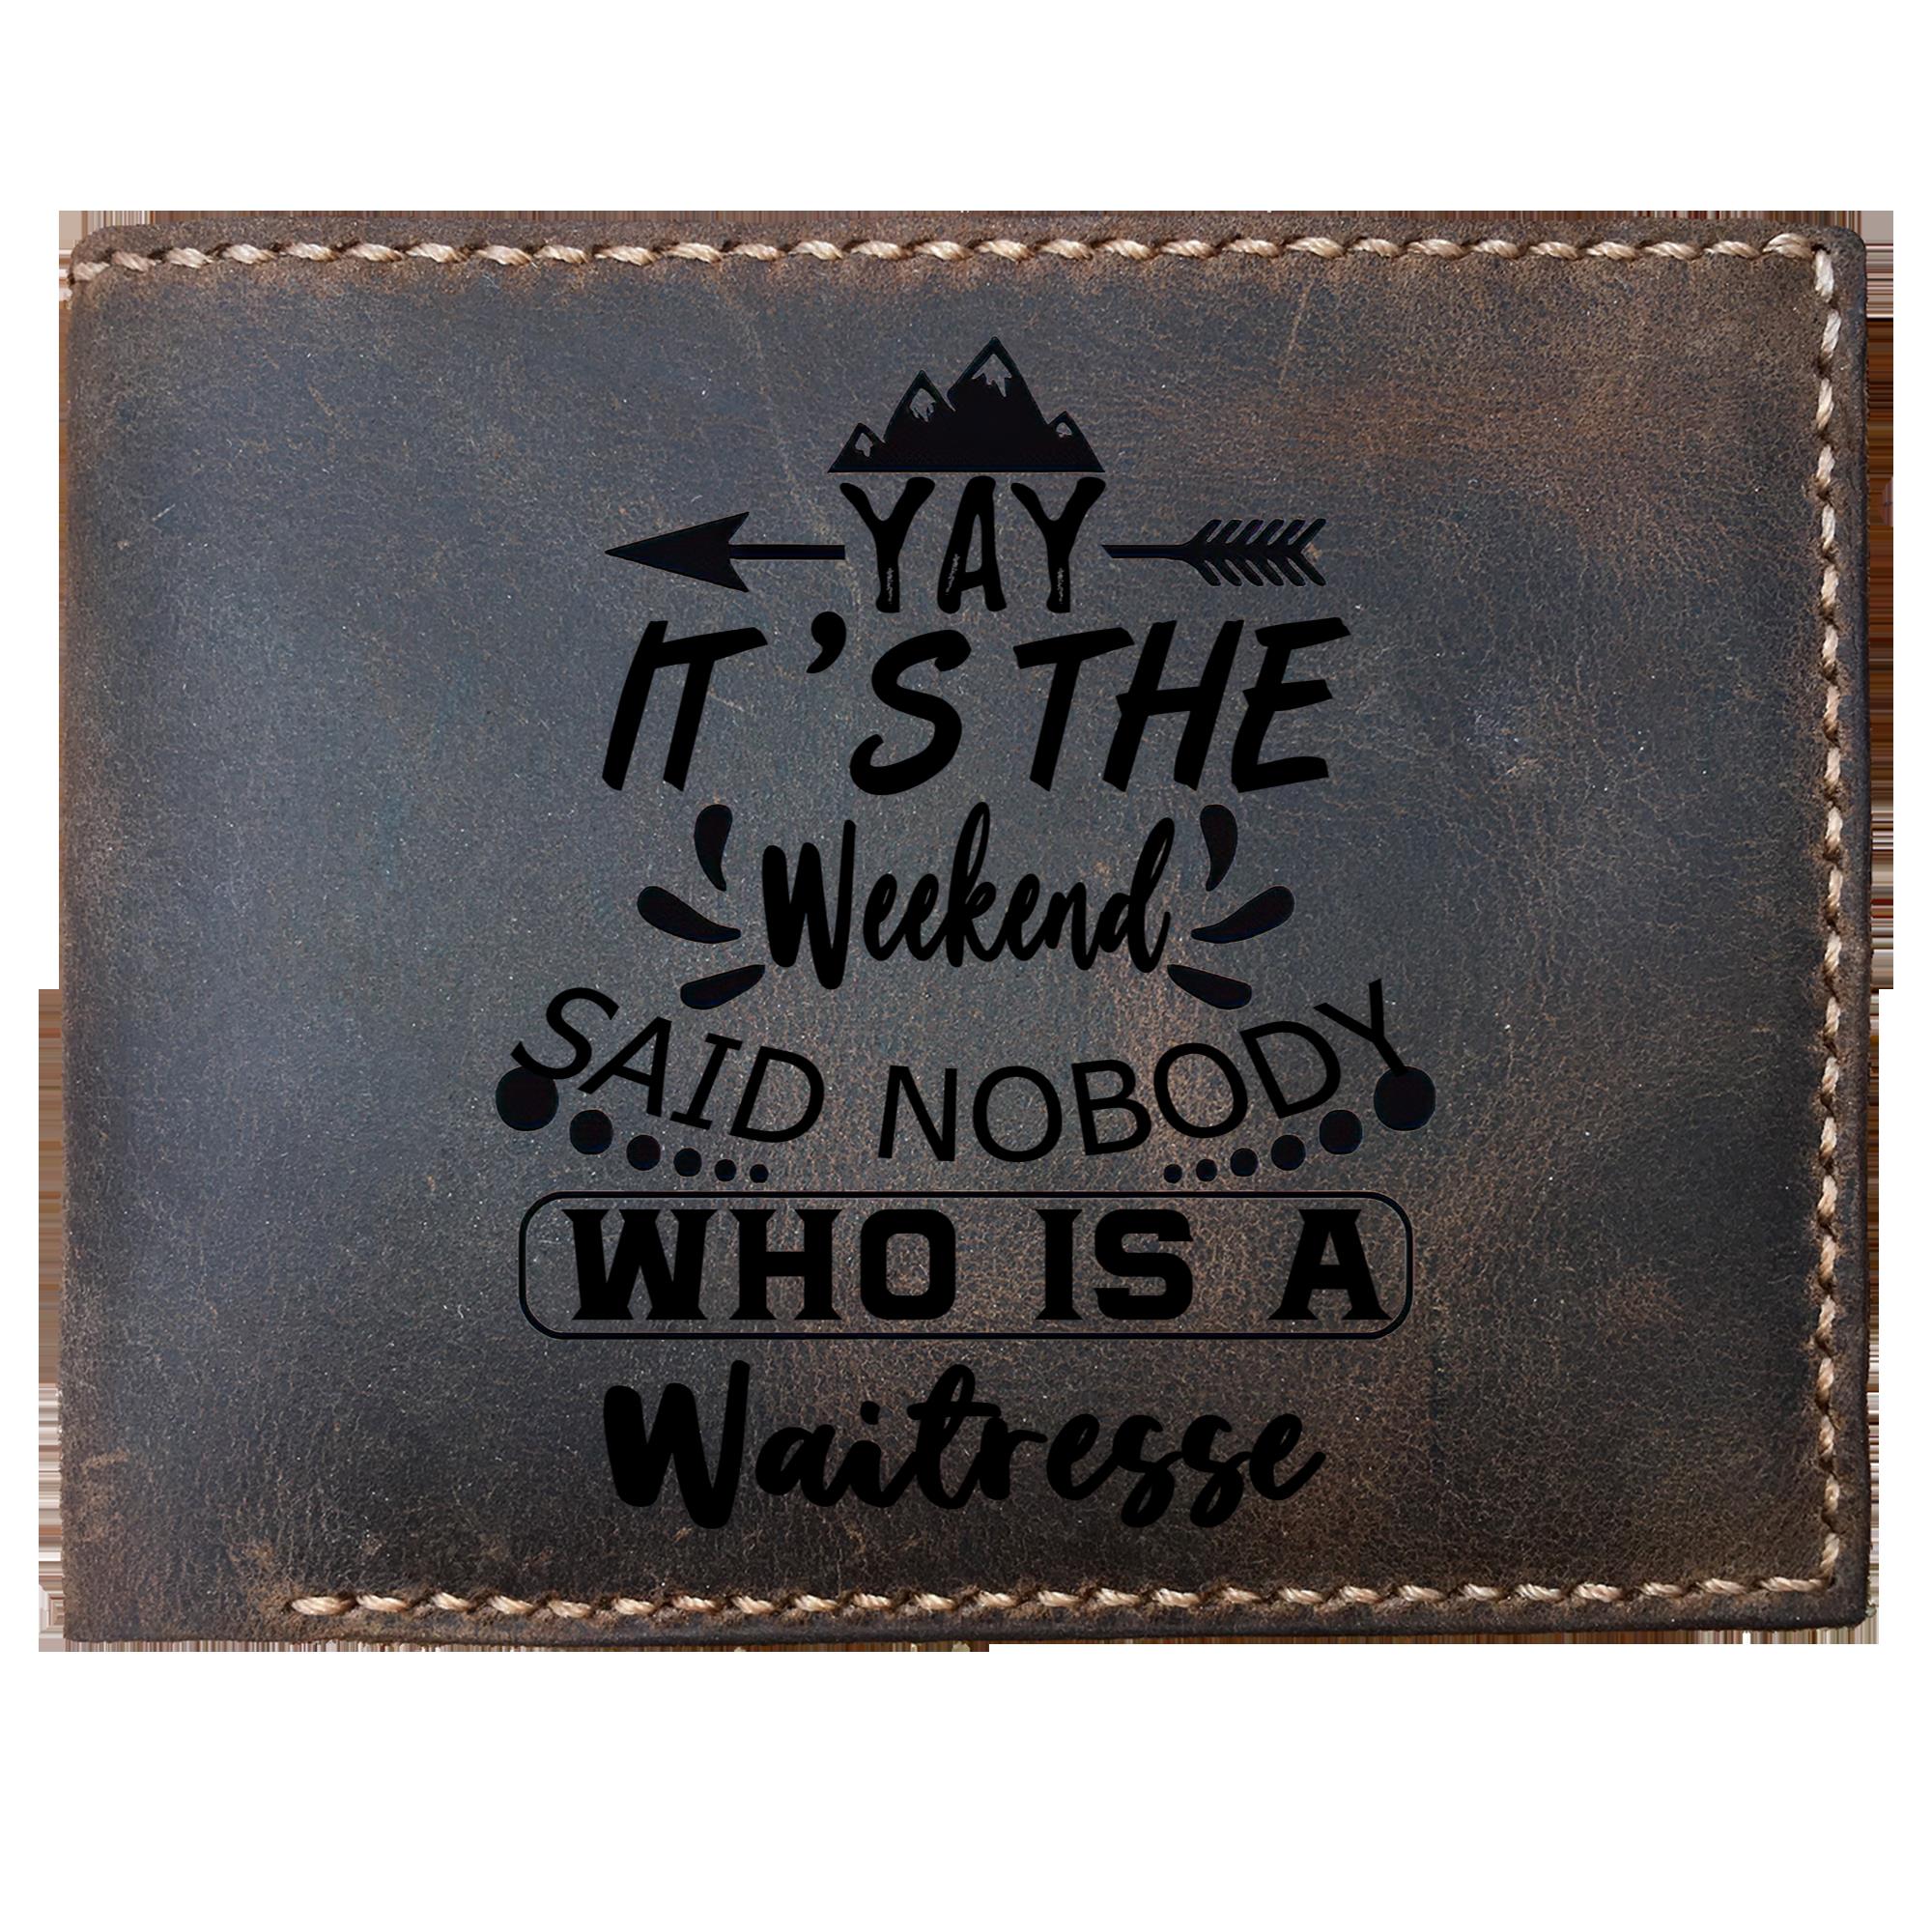 Skitongifts Funny Custom Laser Engraved Bifold Leather Wallet For Men, It's The Weekend Said Nobody Who Is A Waitresse, Father's Day Gifts